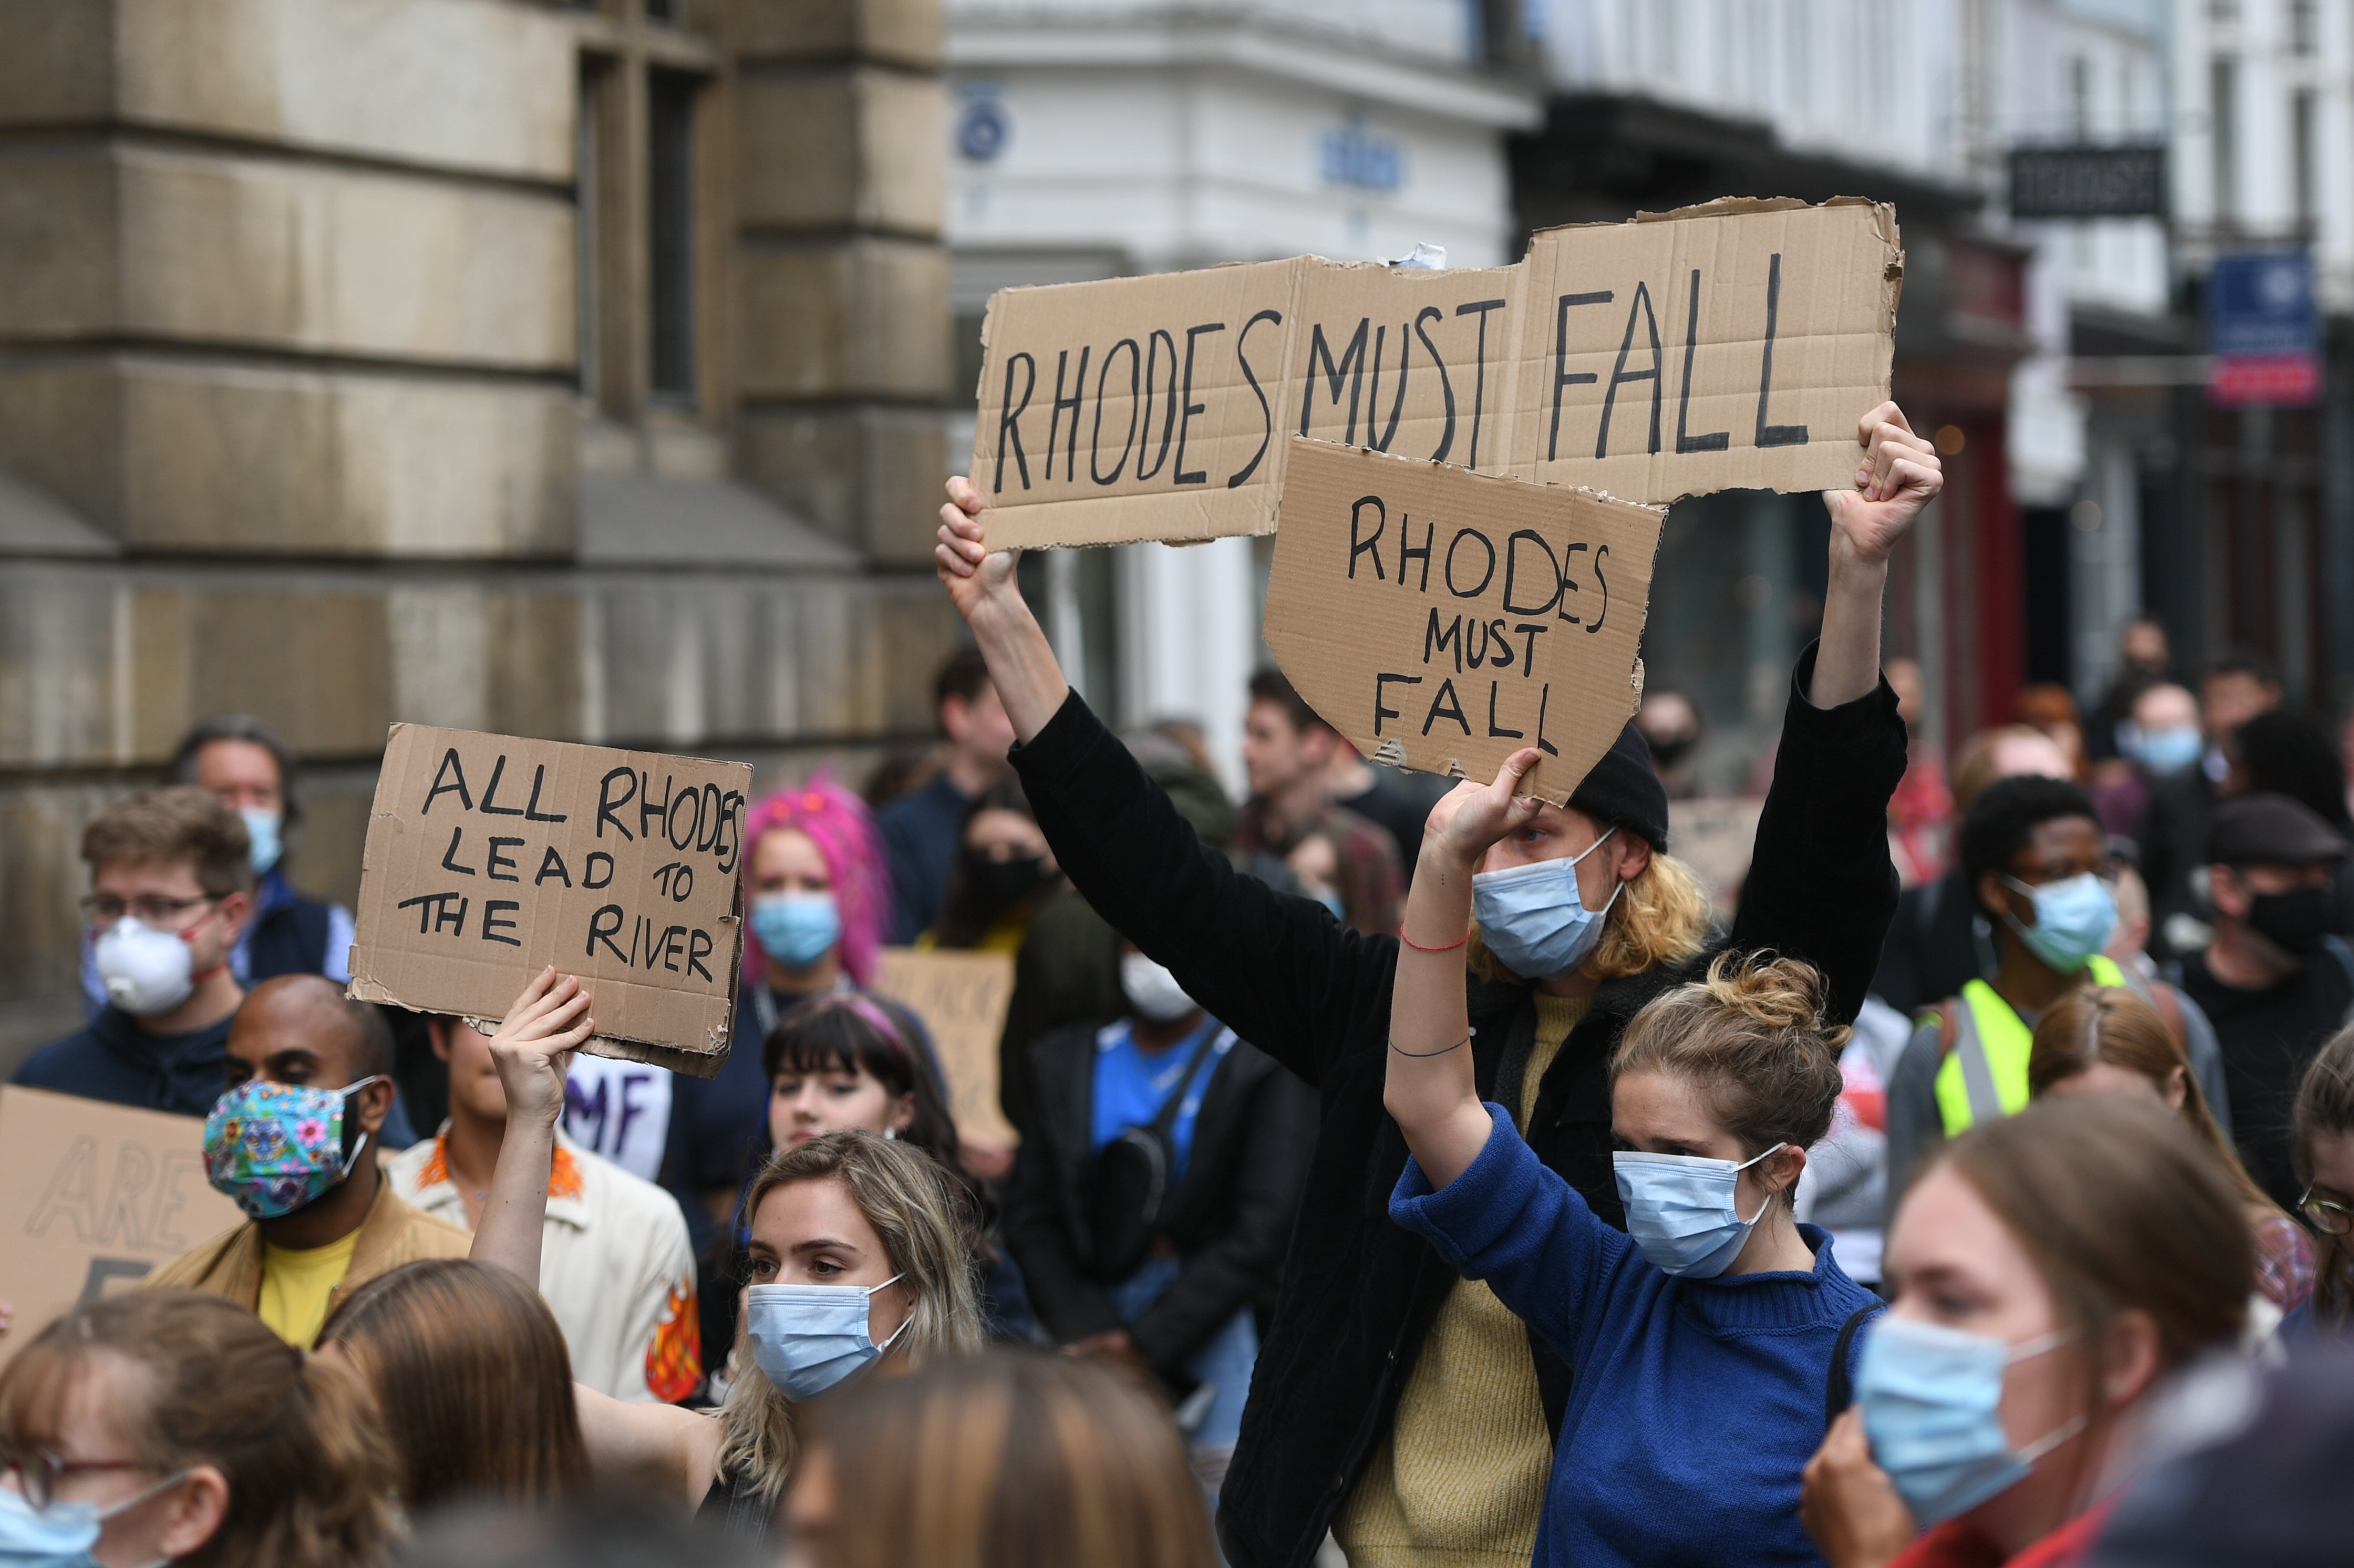 Protesters in Oxford during a protest calling for the removal of the statue of Cecil Rhodes from Oriel college